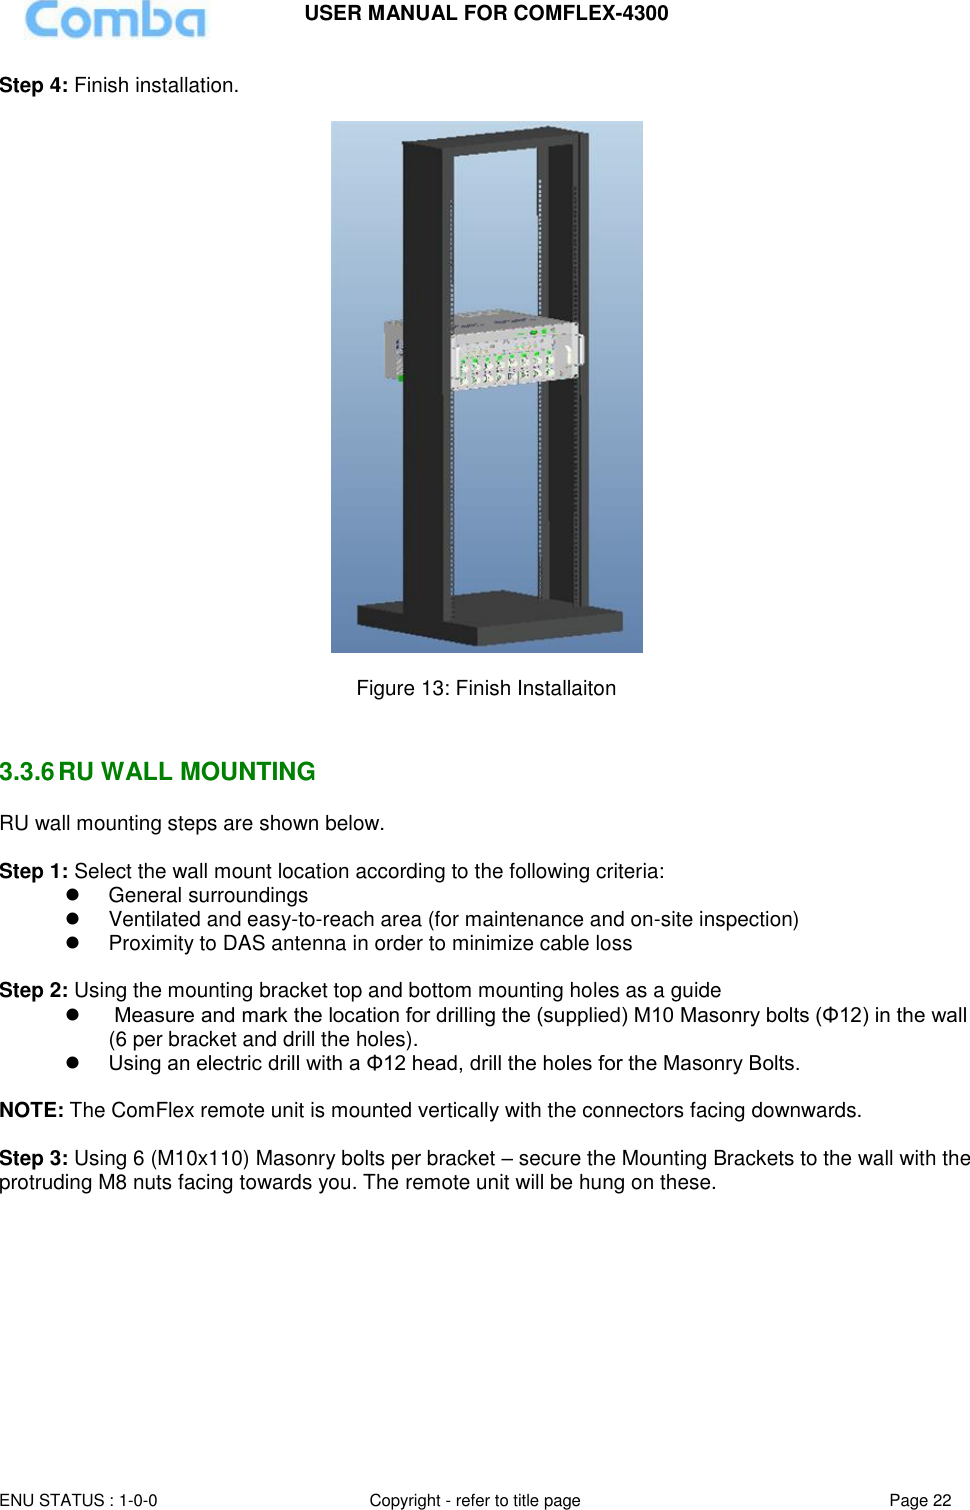 USER MANUAL FOR COMFLEX-4300 ENU STATUS : 1-0-0 Copyright - refer to title page Page 22  Step 4: Finish installation.    Figure 13: Finish Installaiton   3.3.6 RU WALL MOUNTING RU wall mounting steps are shown below.  Step 1: Select the wall mount location according to the following criteria:   General surroundings   Ventilated and easy-to-reach area (for maintenance and on-site inspection)   Proximity to DAS antenna in order to minimize cable loss  Step 2: Using the mounting bracket top and bottom mounting holes as a guide     Measure and mark the location for drilling the (supplied) M10 Masonry bolts (Φ12) in the wall (6 per bracket and drill the holes).  Using an electric drill with a Φ12 head, drill the holes for the Masonry Bolts.  NOTE: The ComFlex remote unit is mounted vertically with the connectors facing downwards.   Step 3: Using 6 (M10x110) Masonry bolts per bracket – secure the Mounting Brackets to the wall with the protruding M8 nuts facing towards you. The remote unit will be hung on these.  